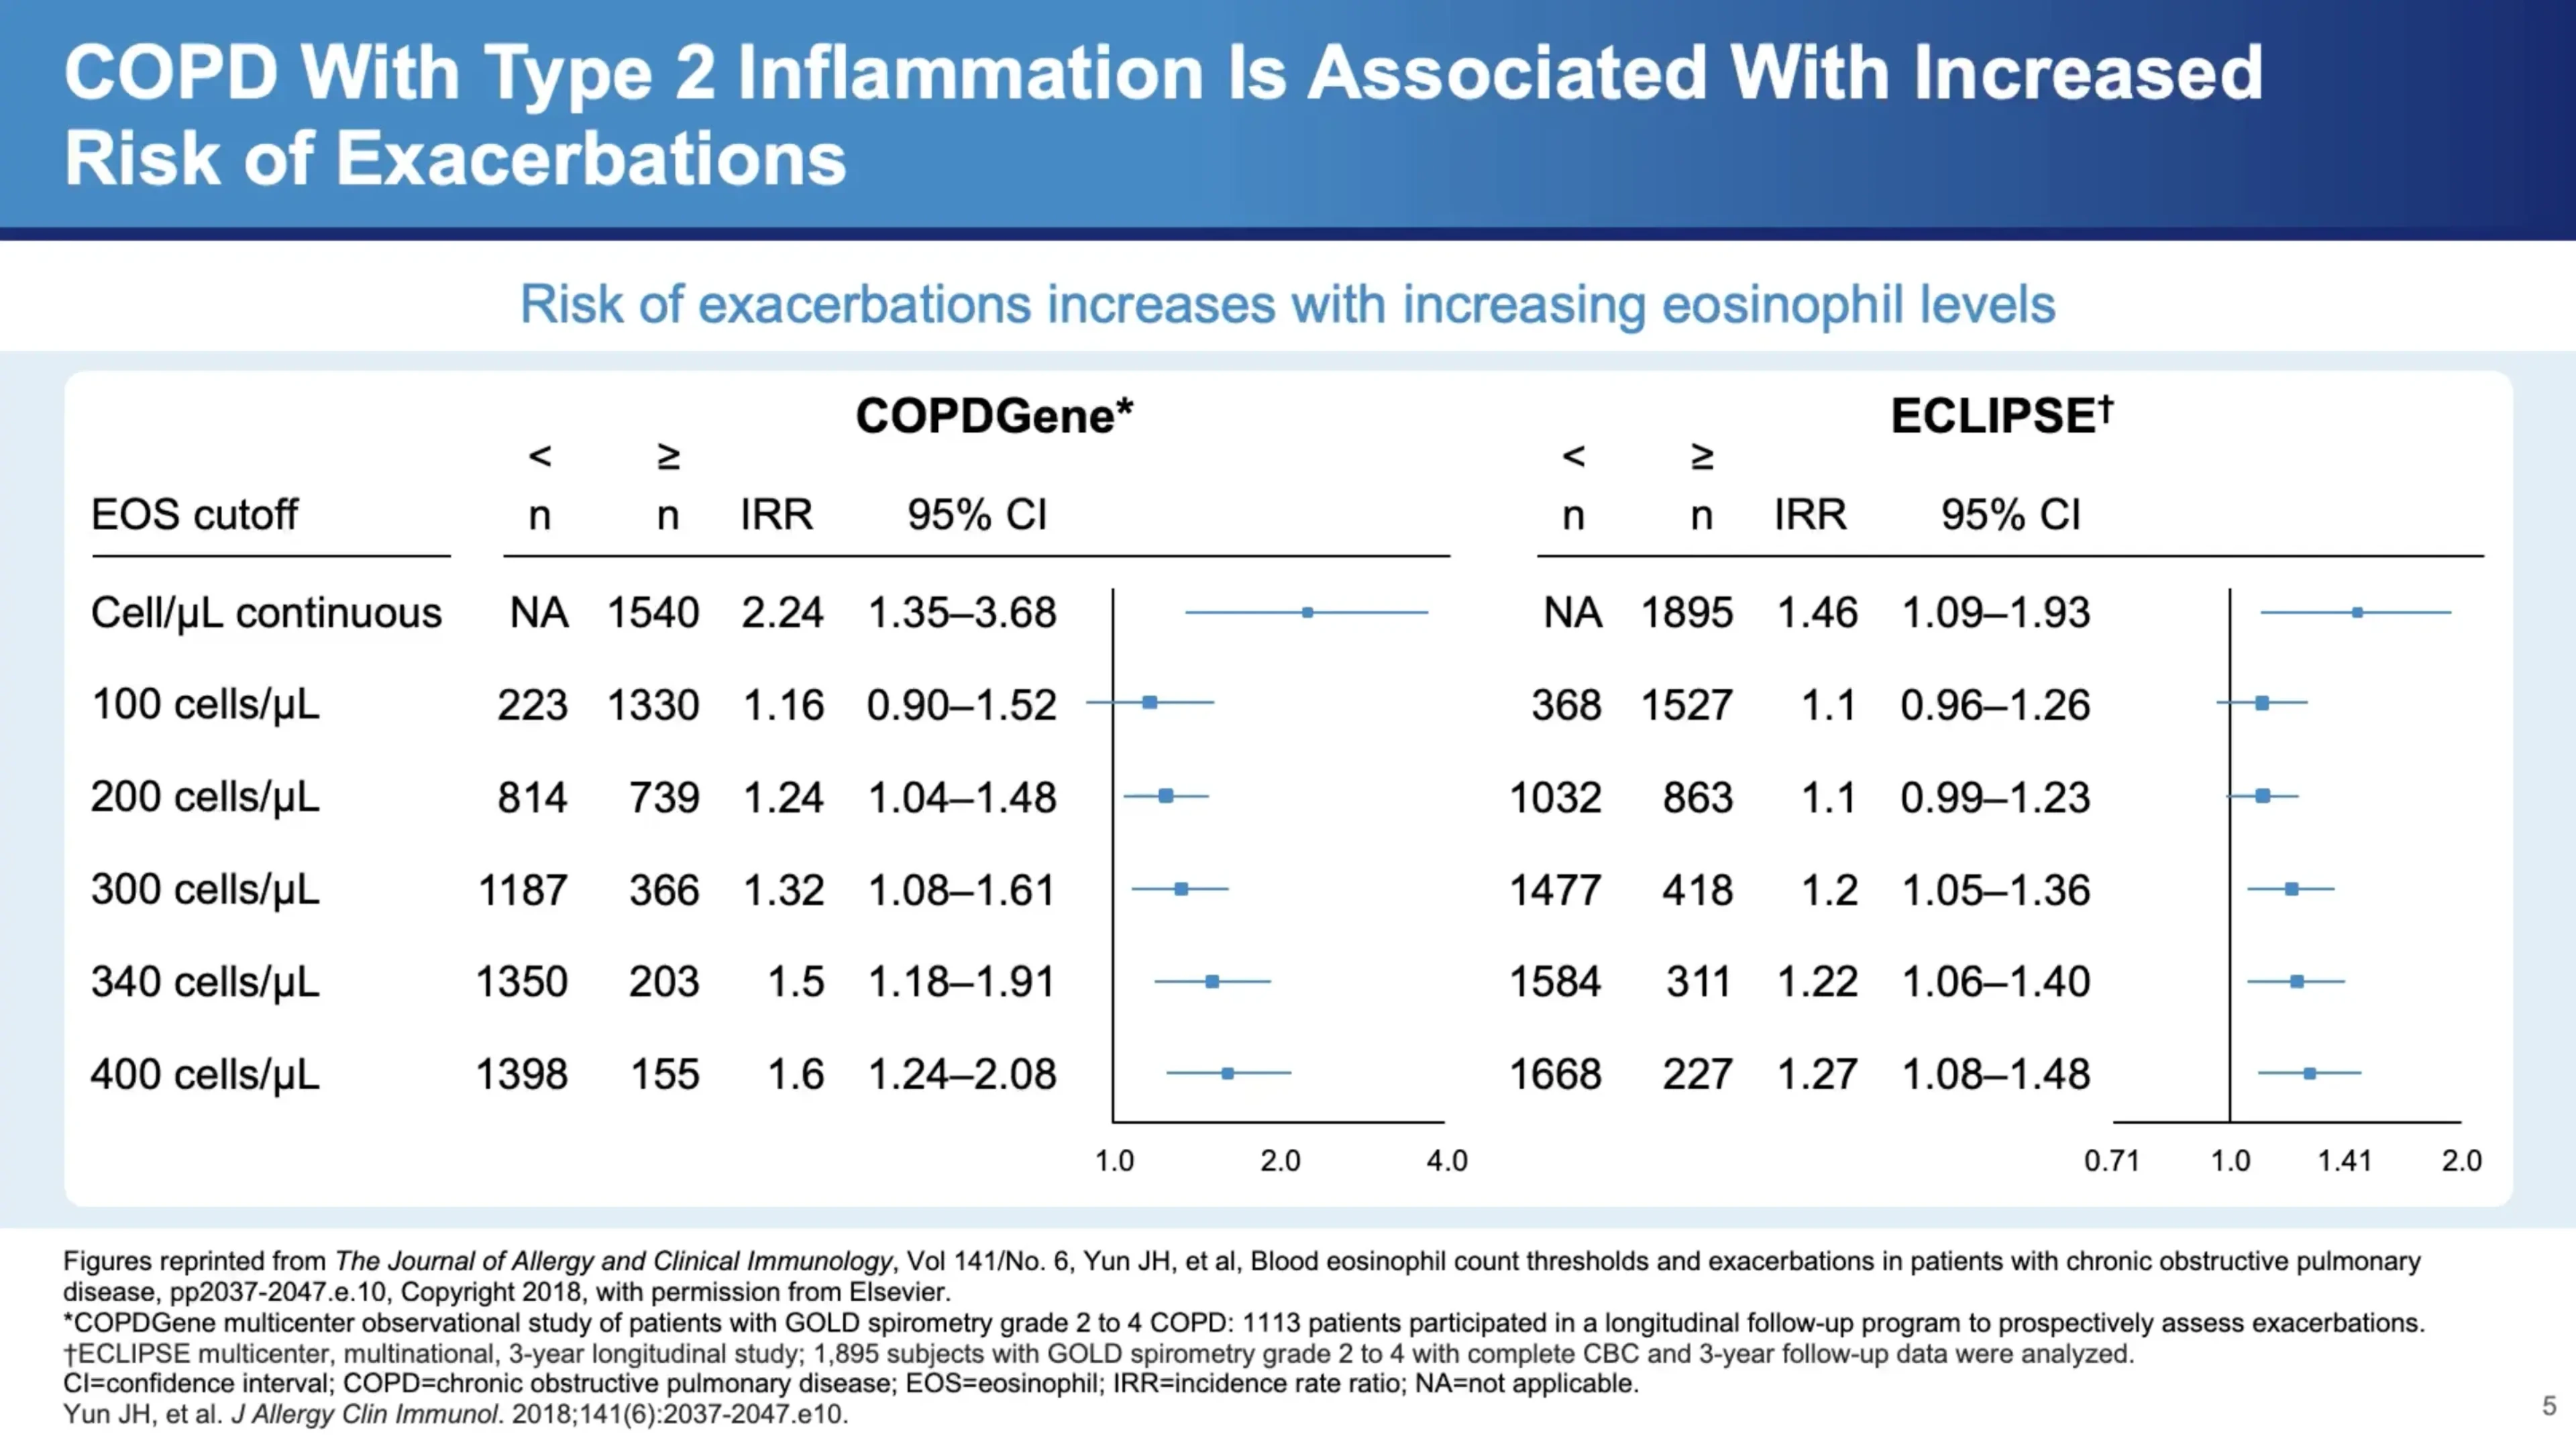 COPD with type 2 inflammation is associated with increased risk of exacerbations